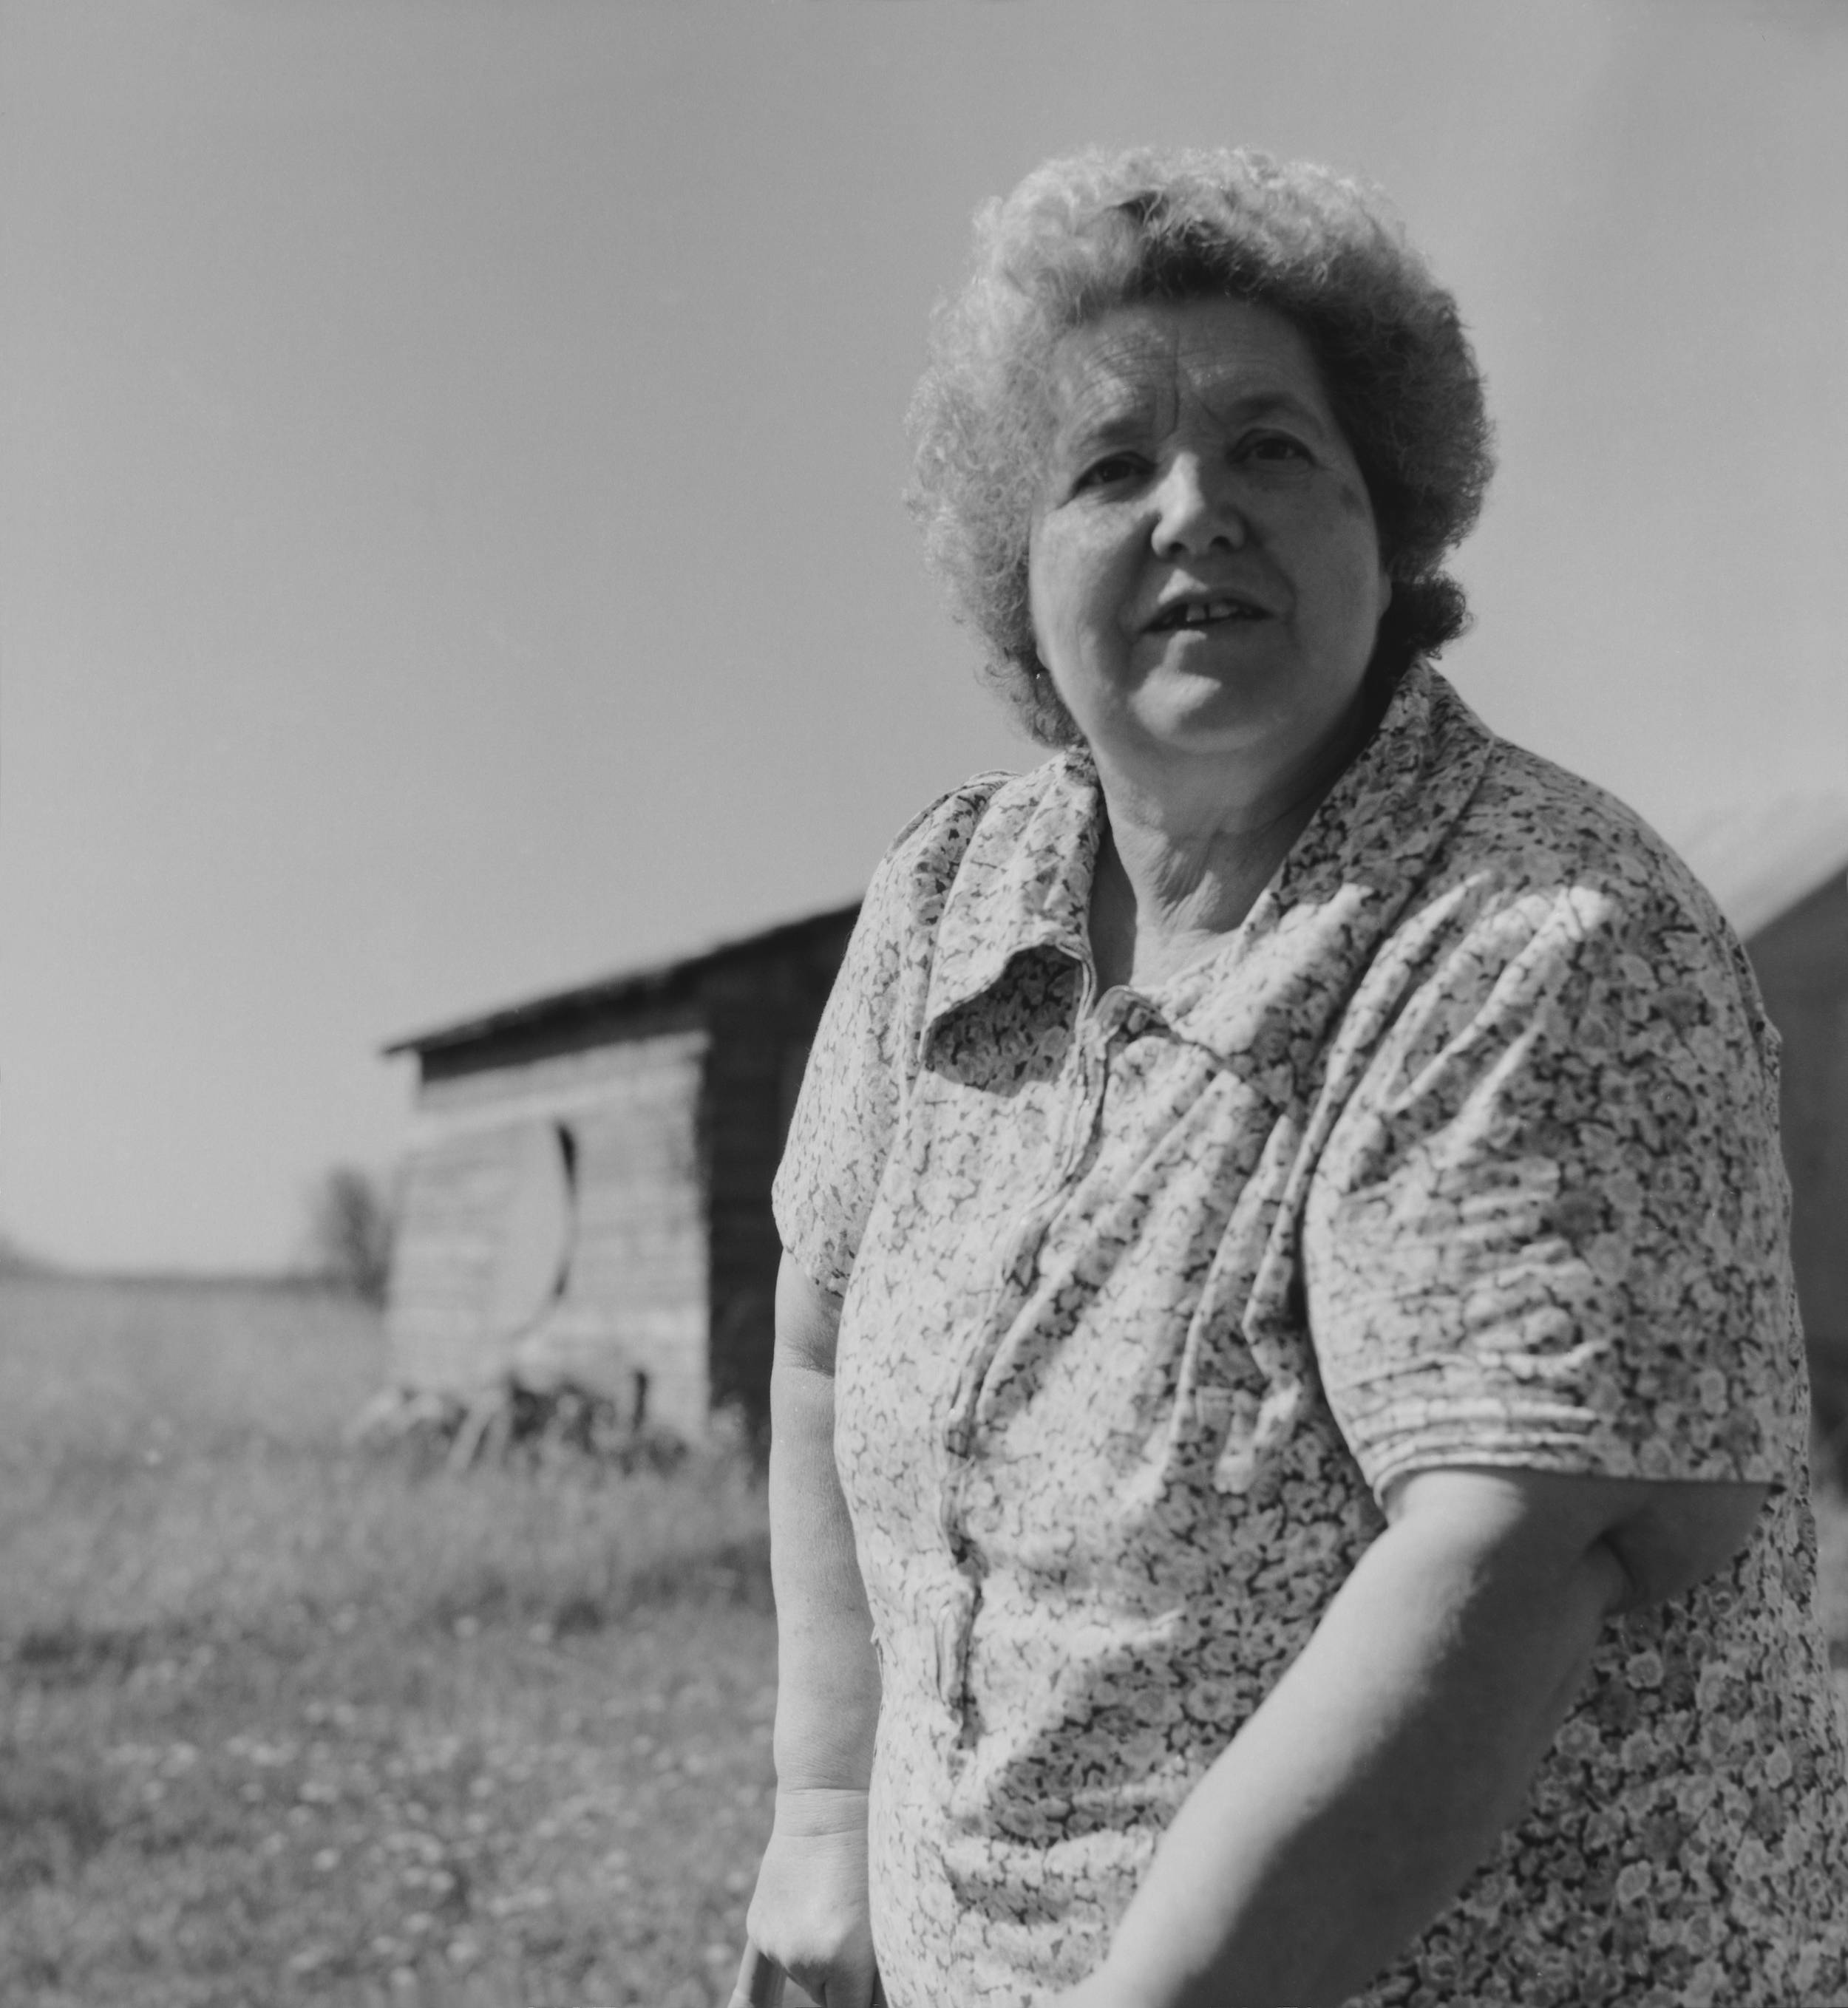 Black and white photo of woman standing in front of old barn out in the prairie. She is wearing a pattern dress.